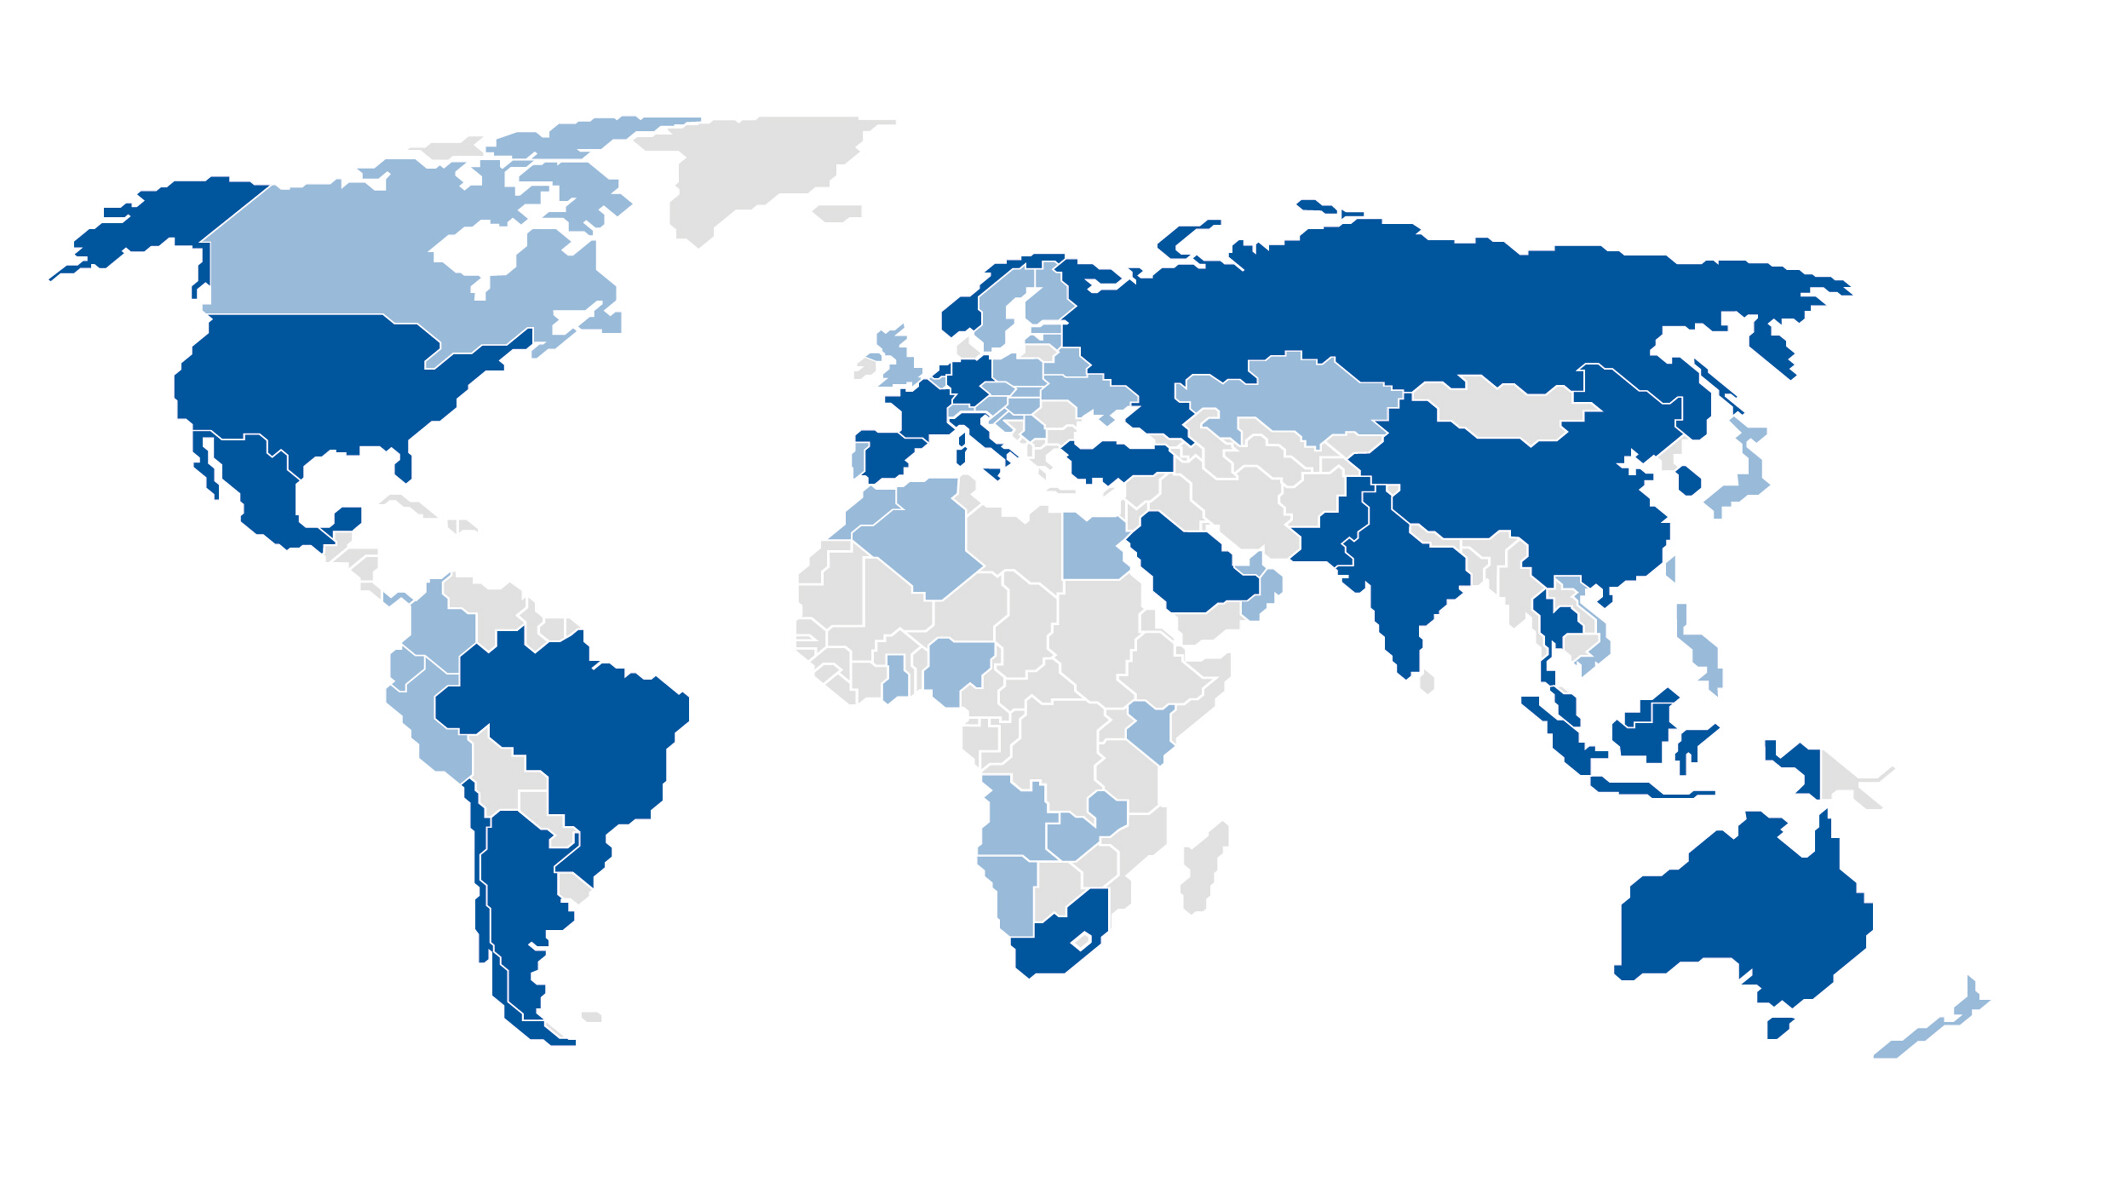 World map of countries in which KSB is active